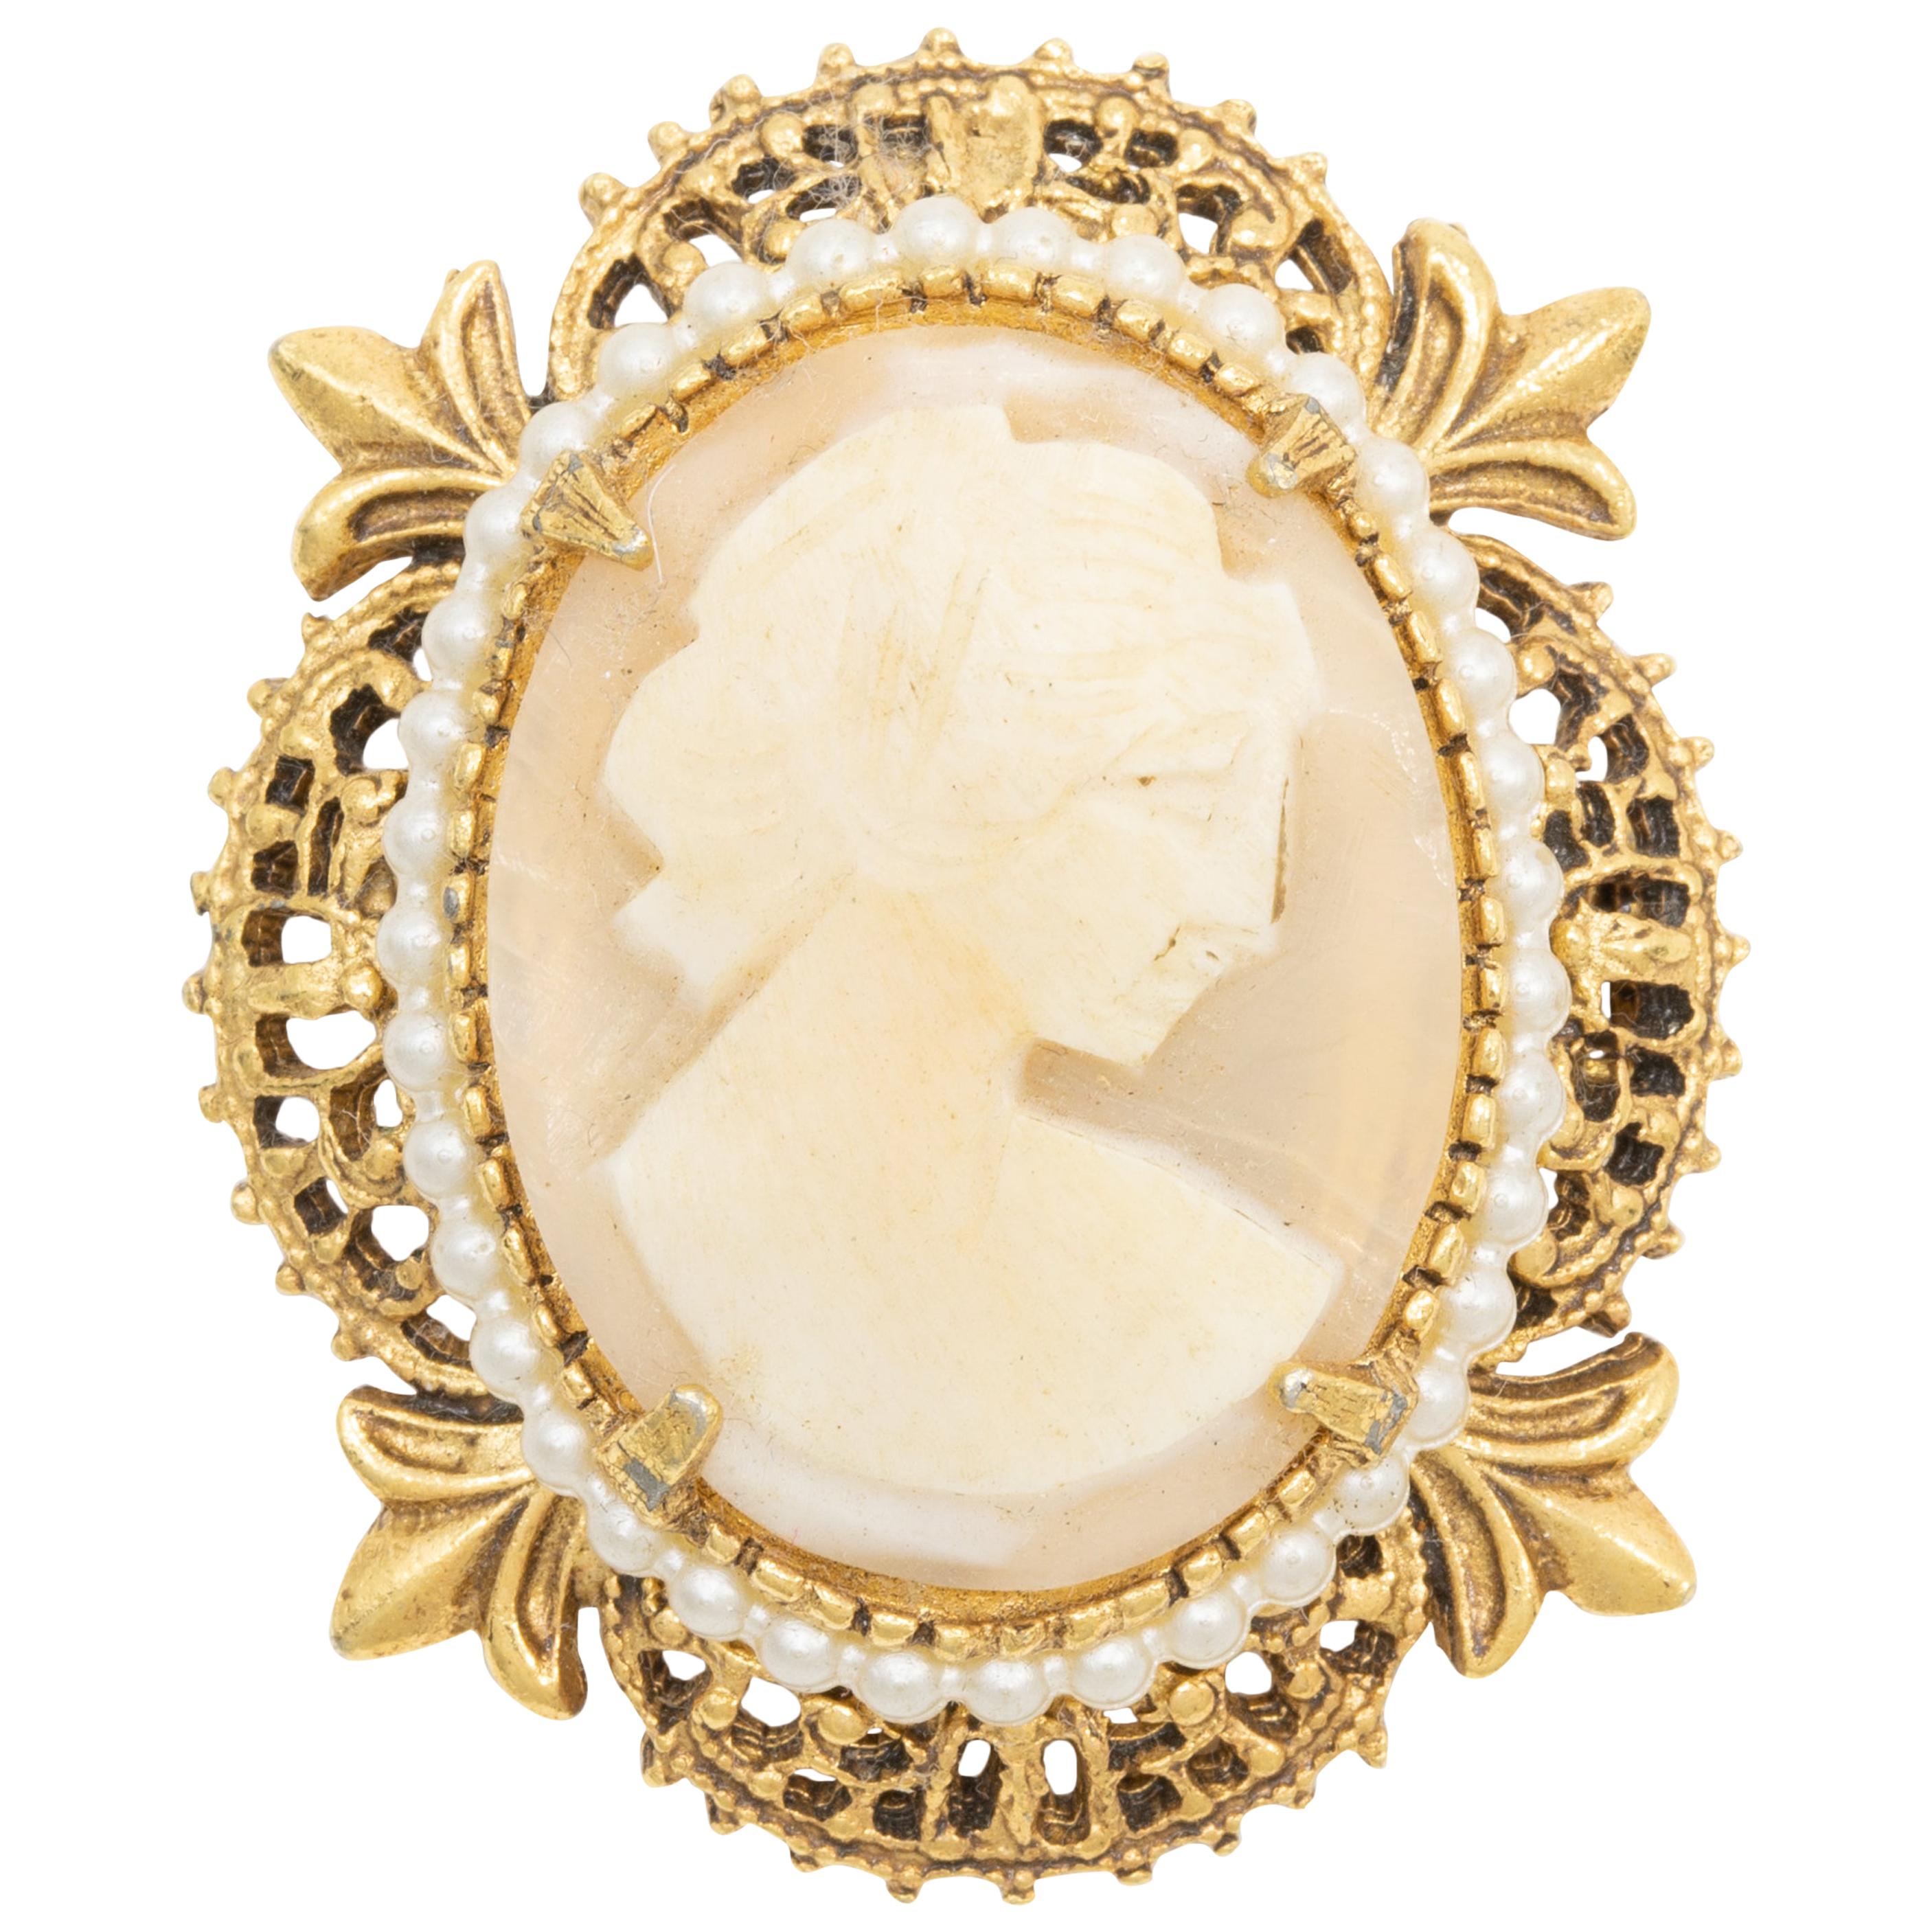 Florenza Gold Victorian Revival Cameo Pin Pendant with Faux Pearls, Mid 1900s